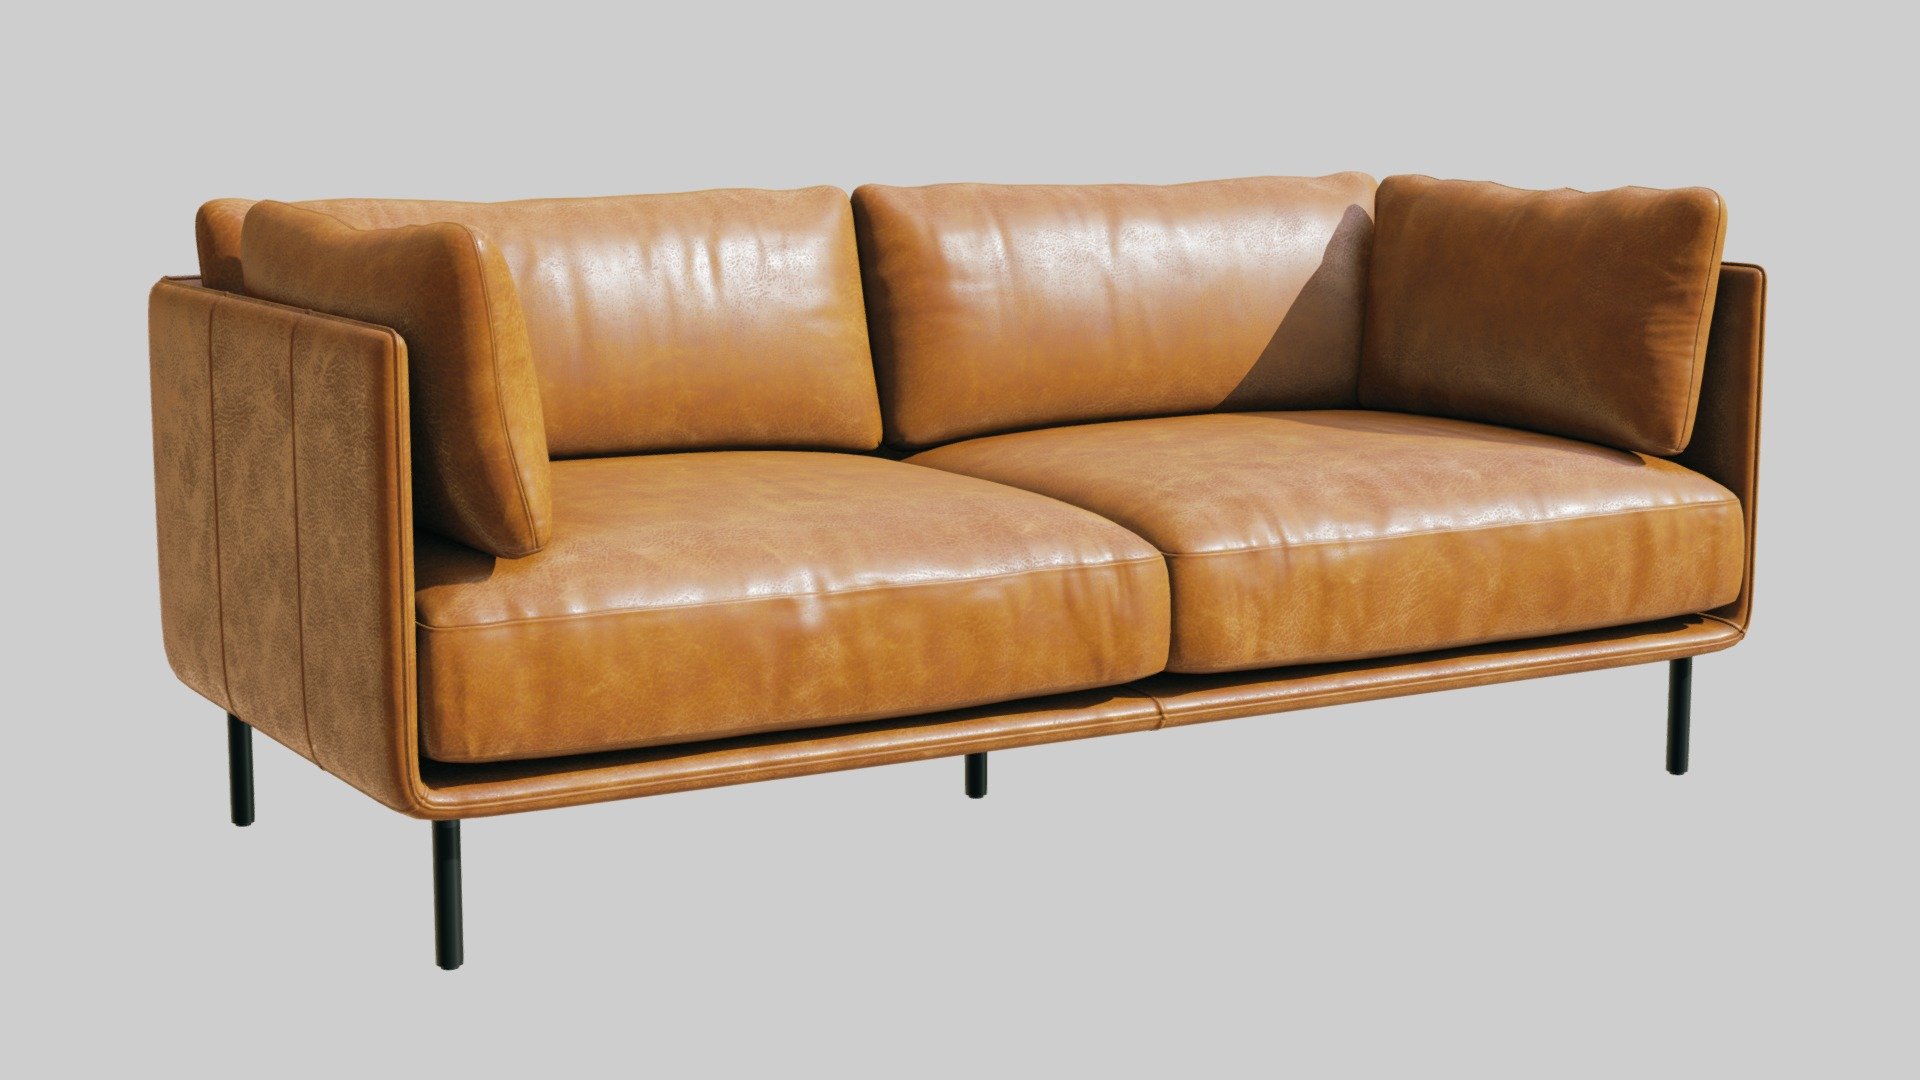 High-quality 3d model of a Crete and Barrel Wells Leather sofa.

20533 polygons
20568 vertices - Crate&Barrel Wells Leather Sofa - Buy Royalty Free 3D model by 3detto 3d model